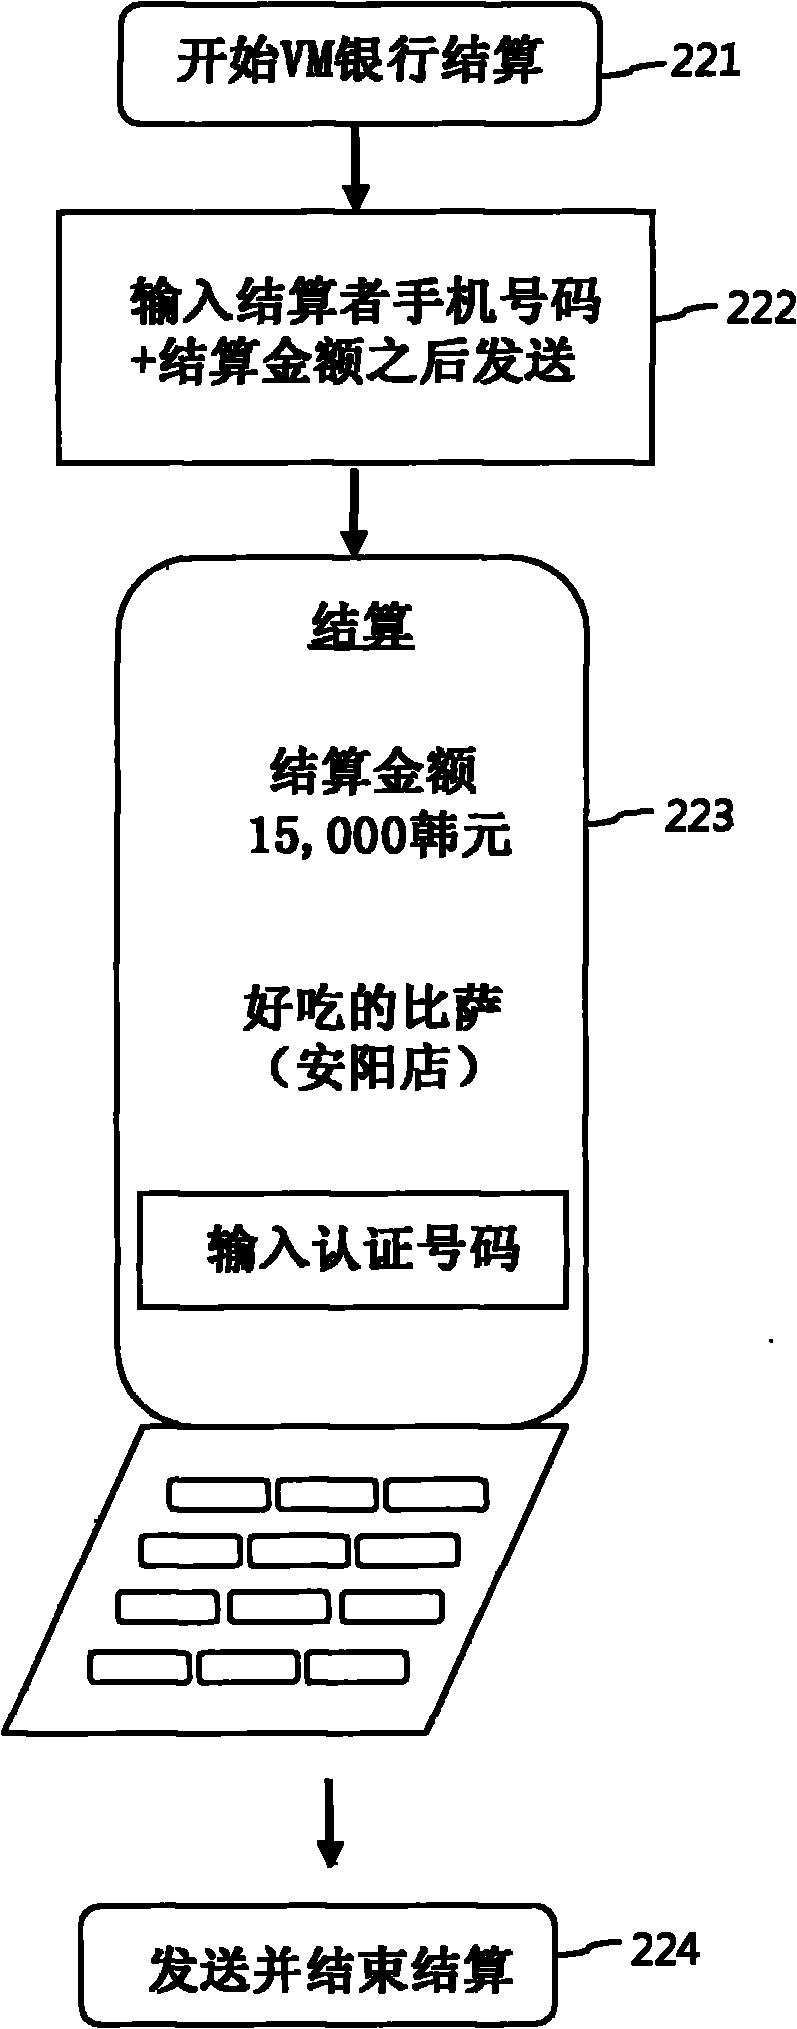 Management system and method for payment and transferring using wireless communication or internet